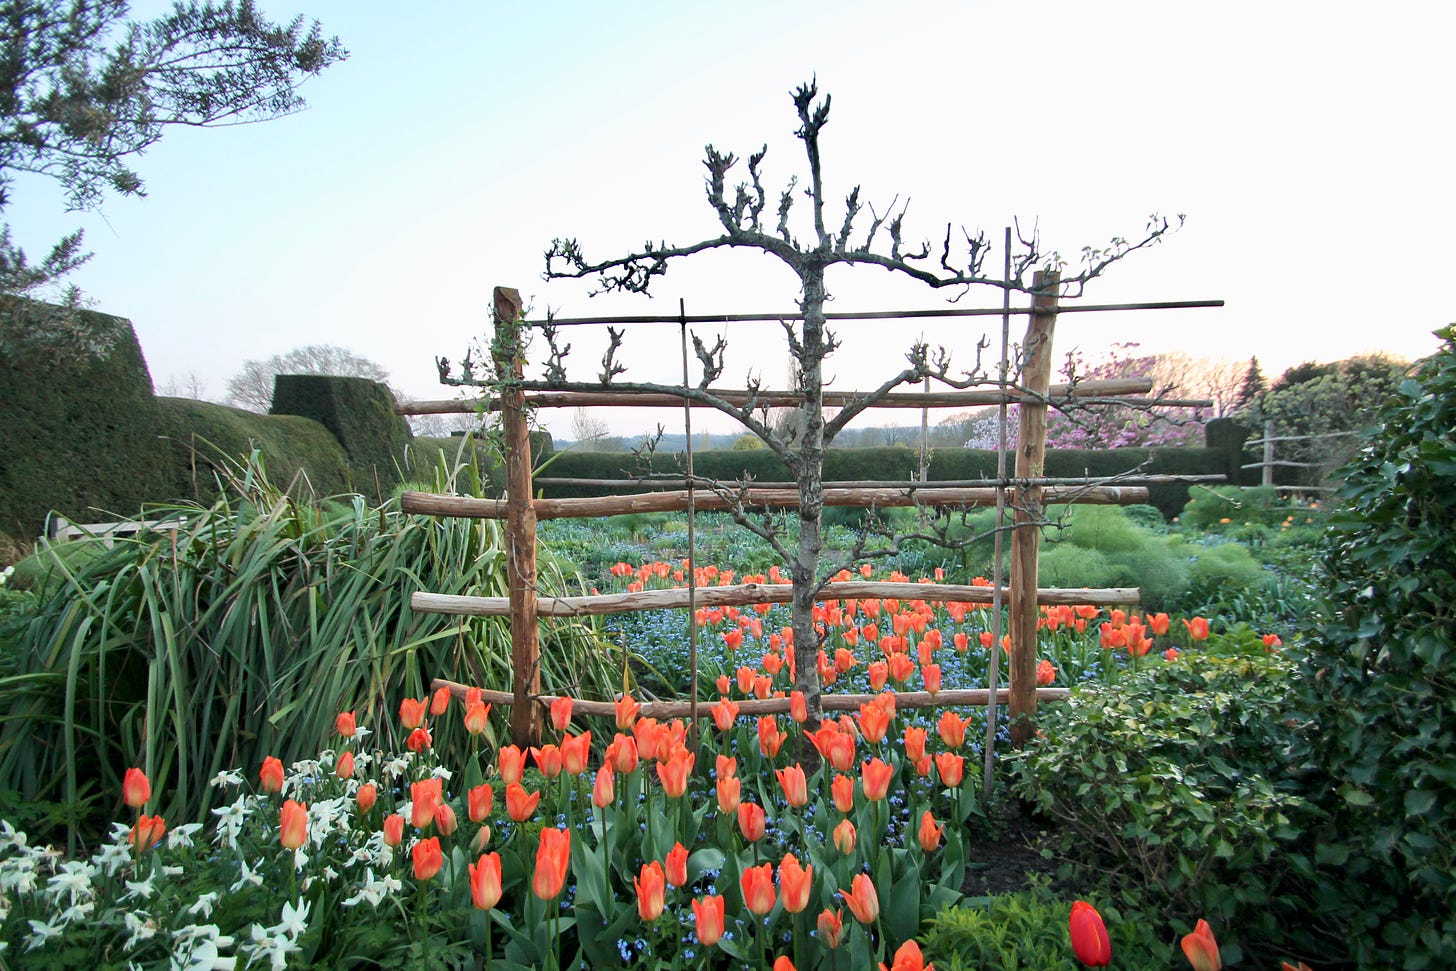 Espalier and a spring tulip display  at Great Dixter. Photo by Molly Hendry